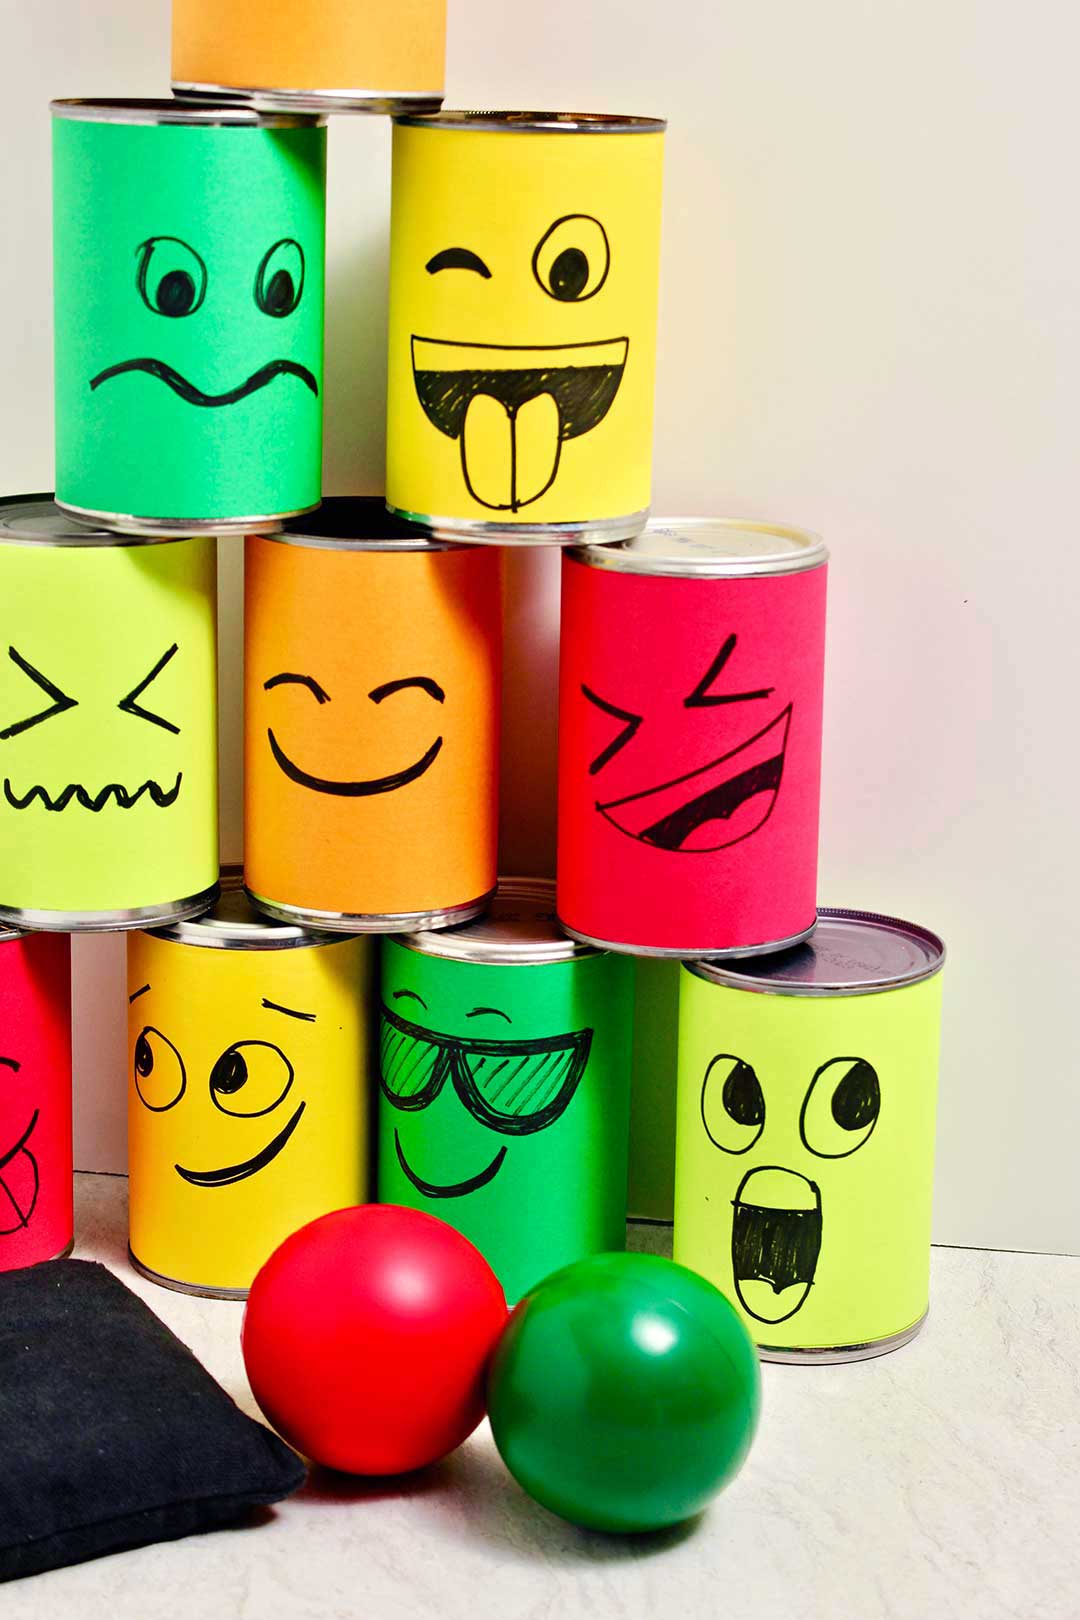 Stacked silly face tin cans in a pyramid shape with a red and green ball and a bean bag.